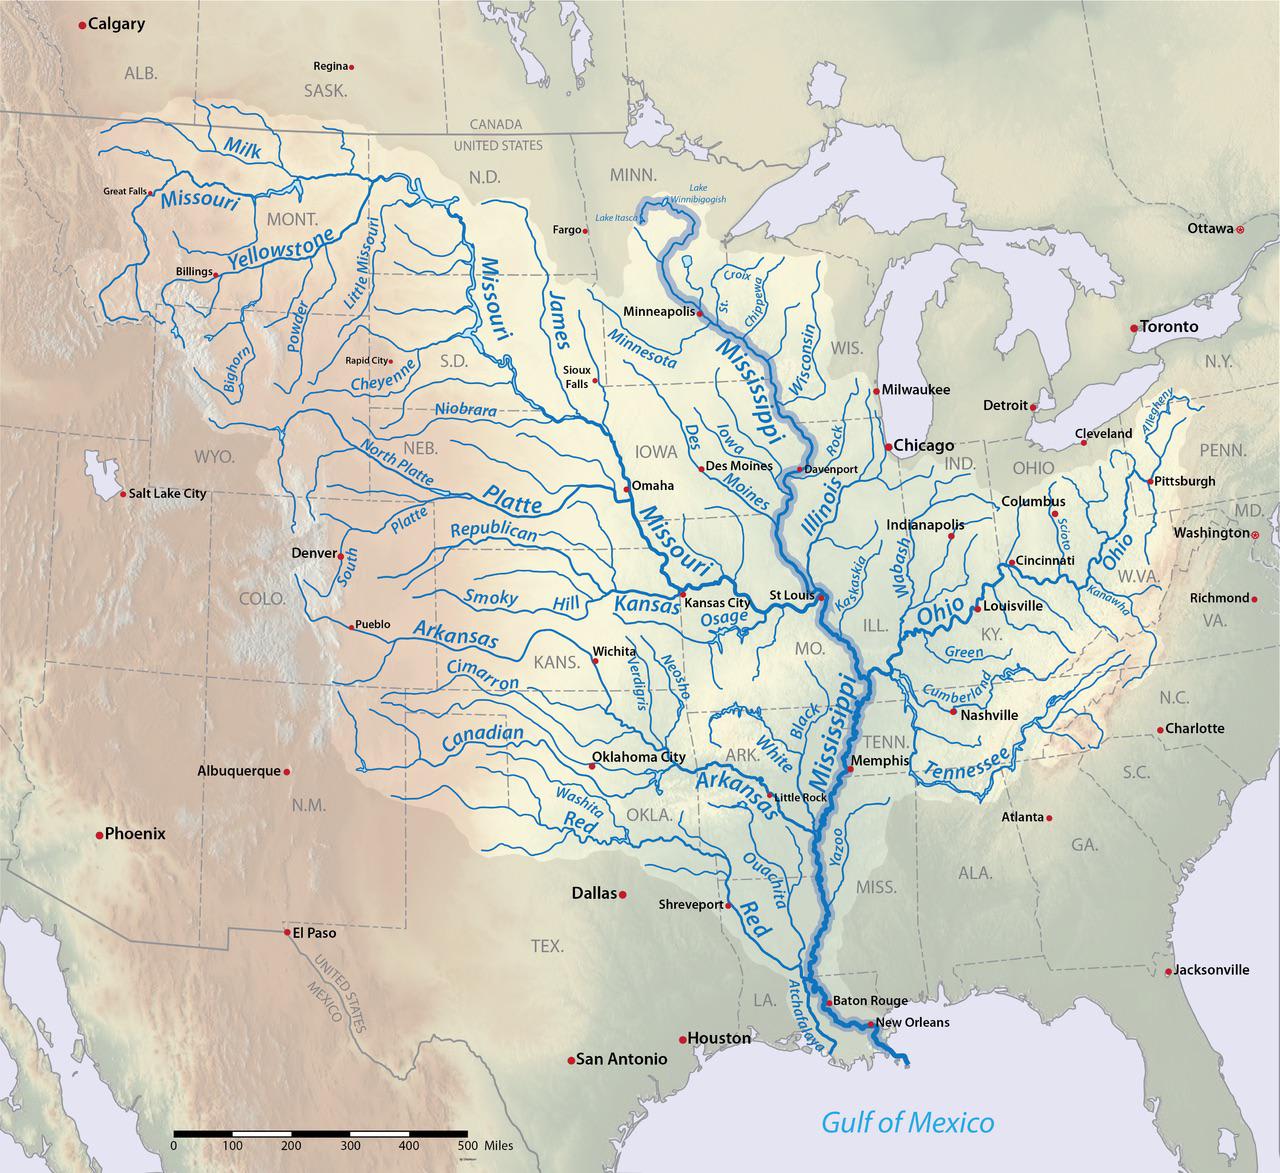 Rivers flowing into the Mississippi River